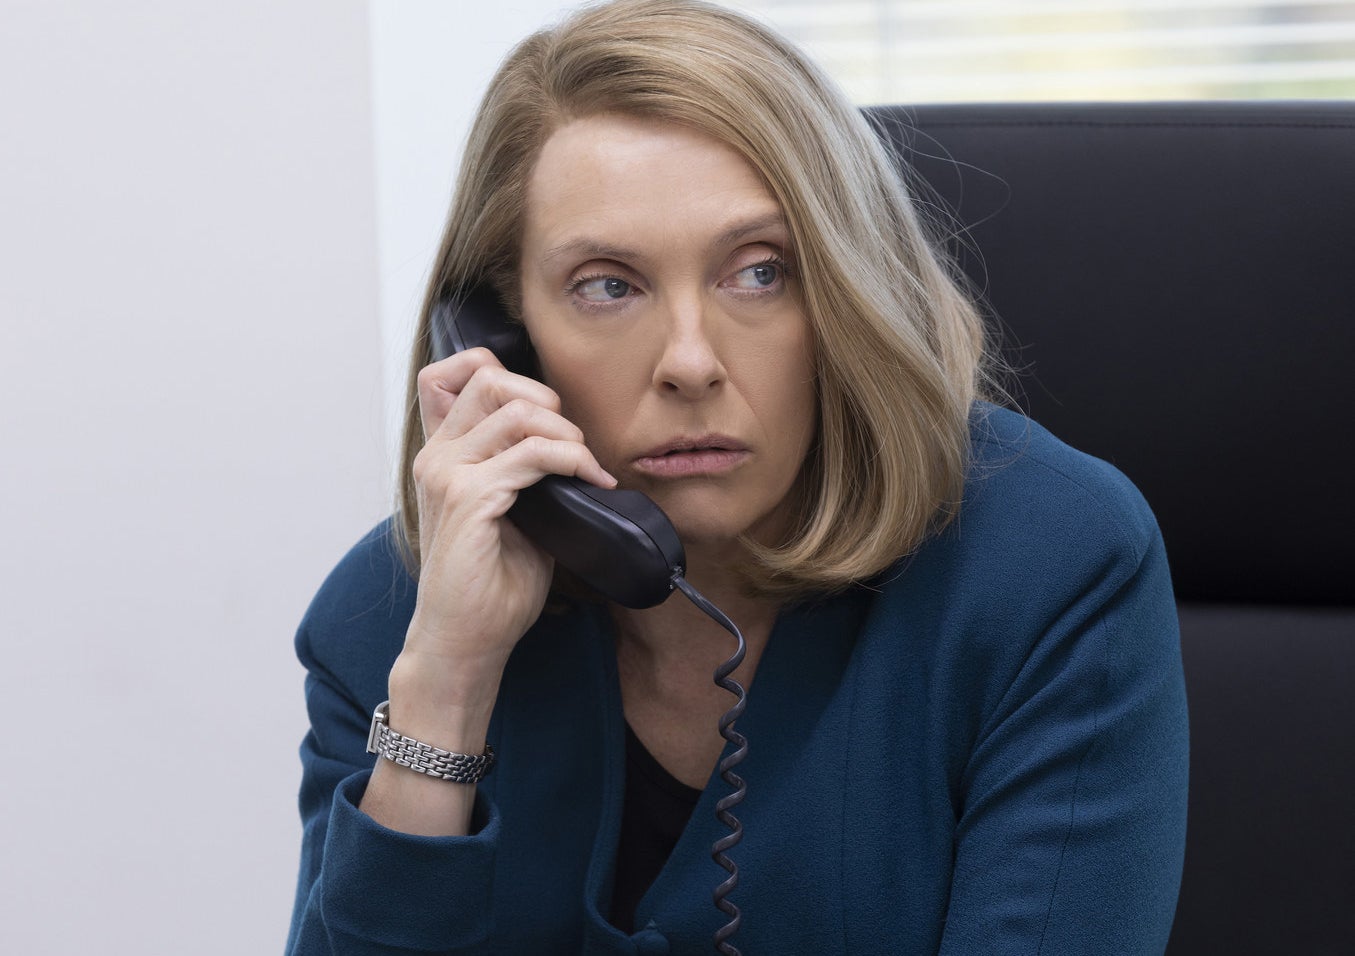 Toni Collette on the phone